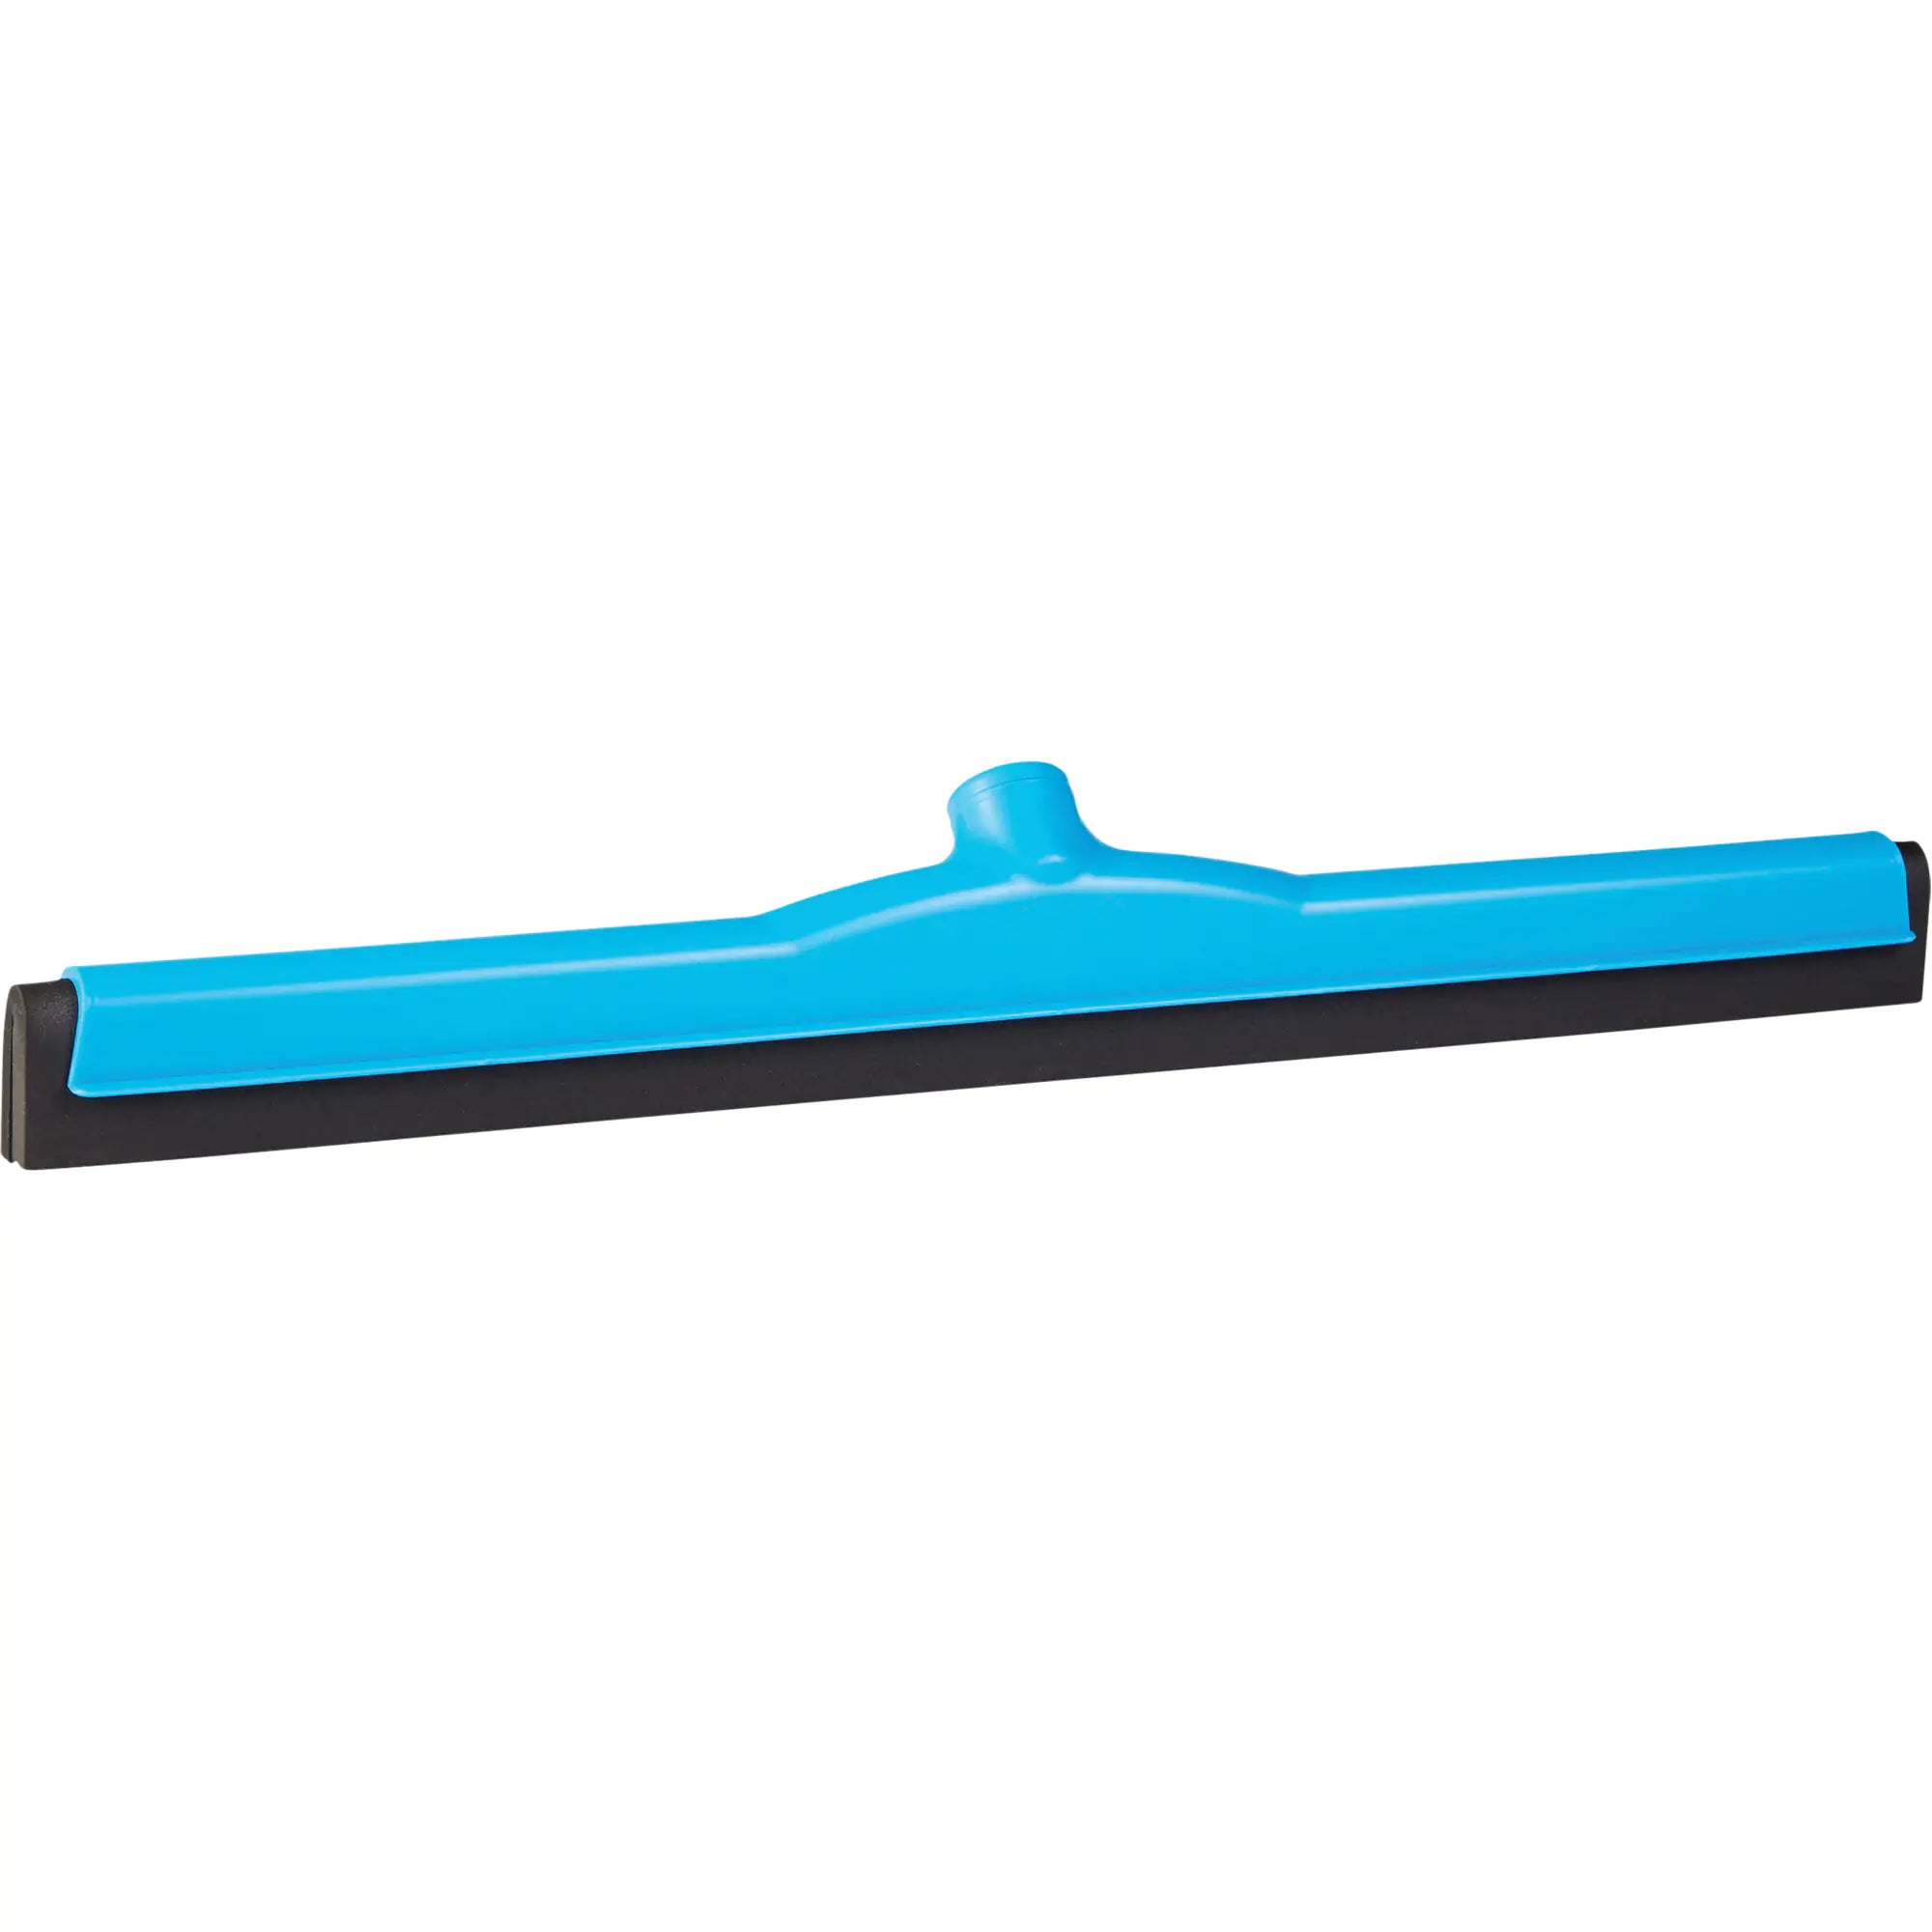 ColorCore Foam Blade Squeegee, 22", Blue